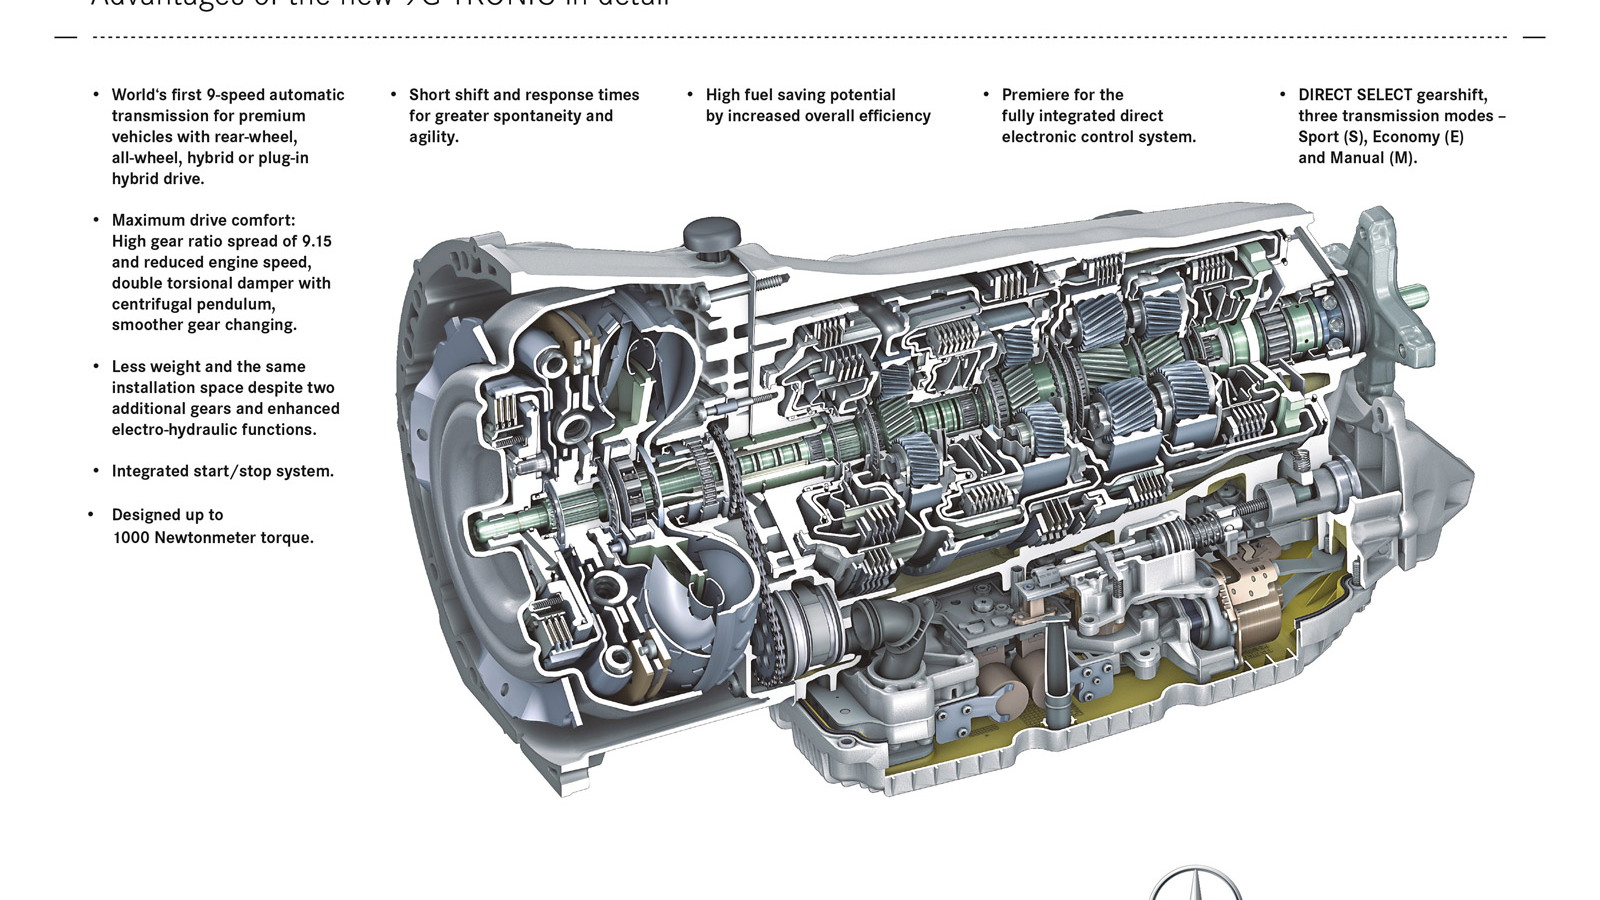 Mercedes-Benz’s 9G-TRONIC nine-speed automatic transmission